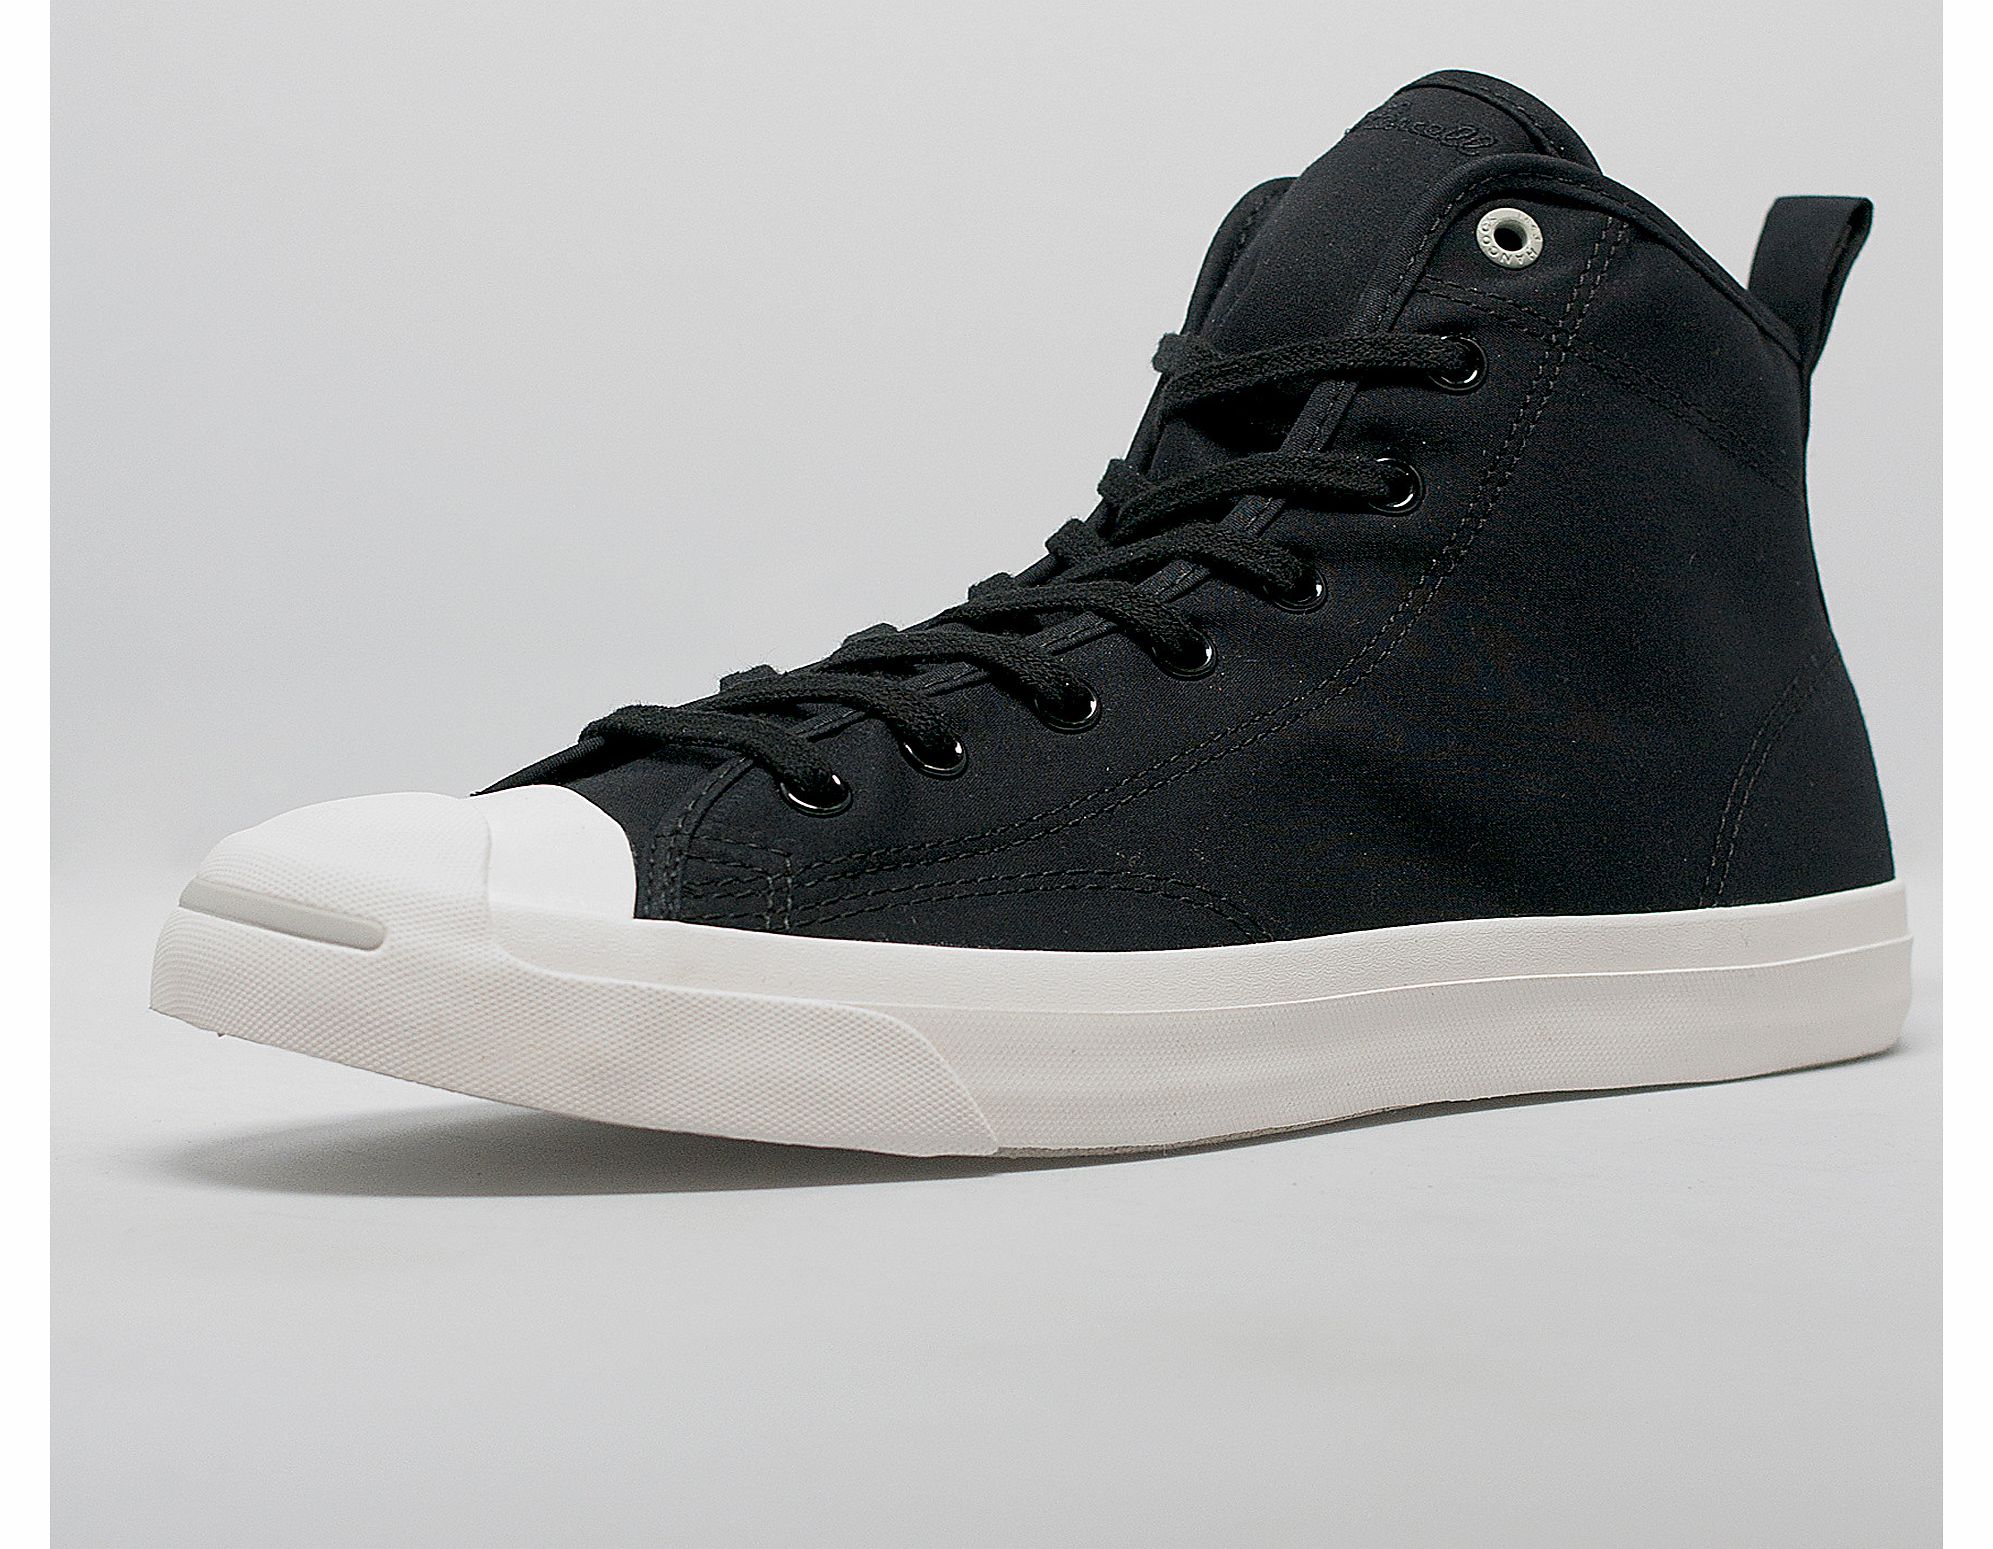 Converse Jack Purcell Crepe QS